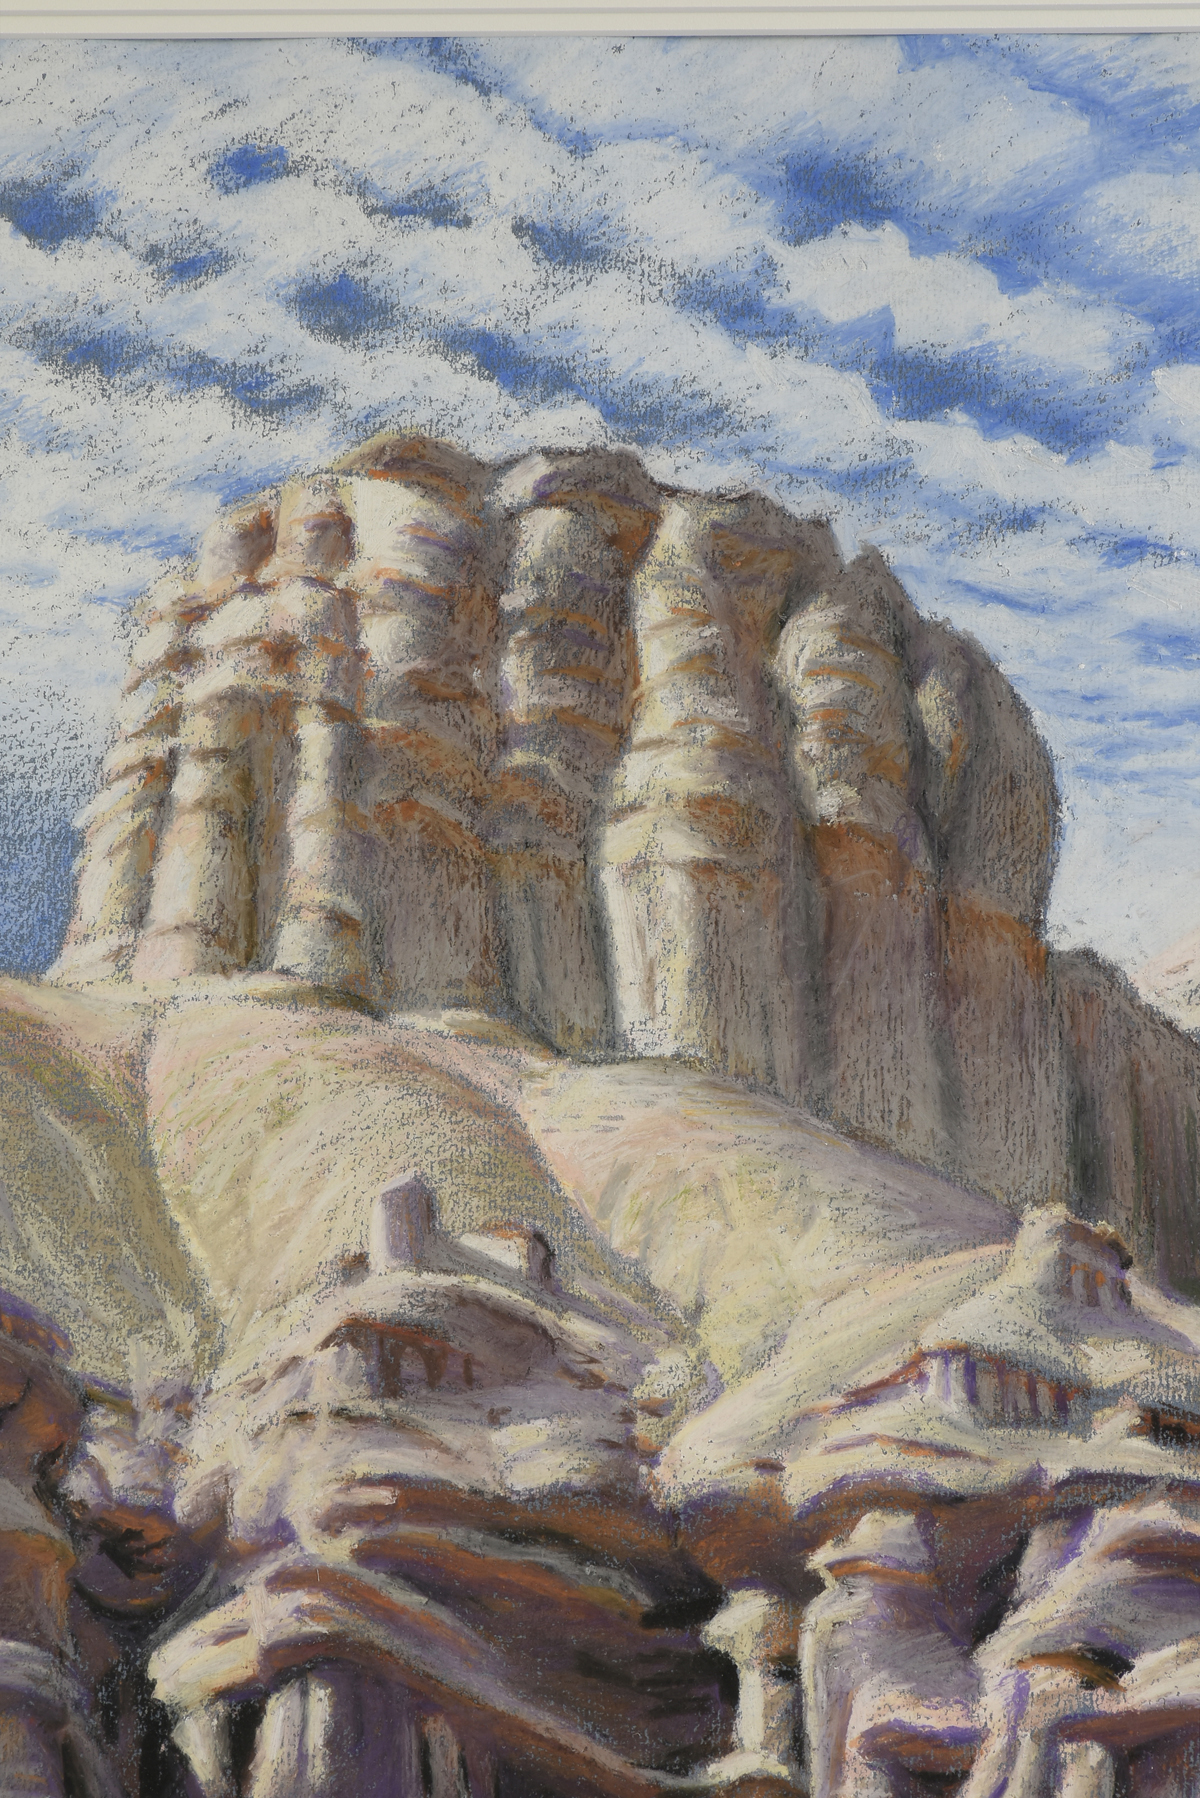 attributed to JAMES DOOLIN (American 1932-2002) A DRAWING, "Desert Dwellers," pastel on paper. 25" x - Image 4 of 11